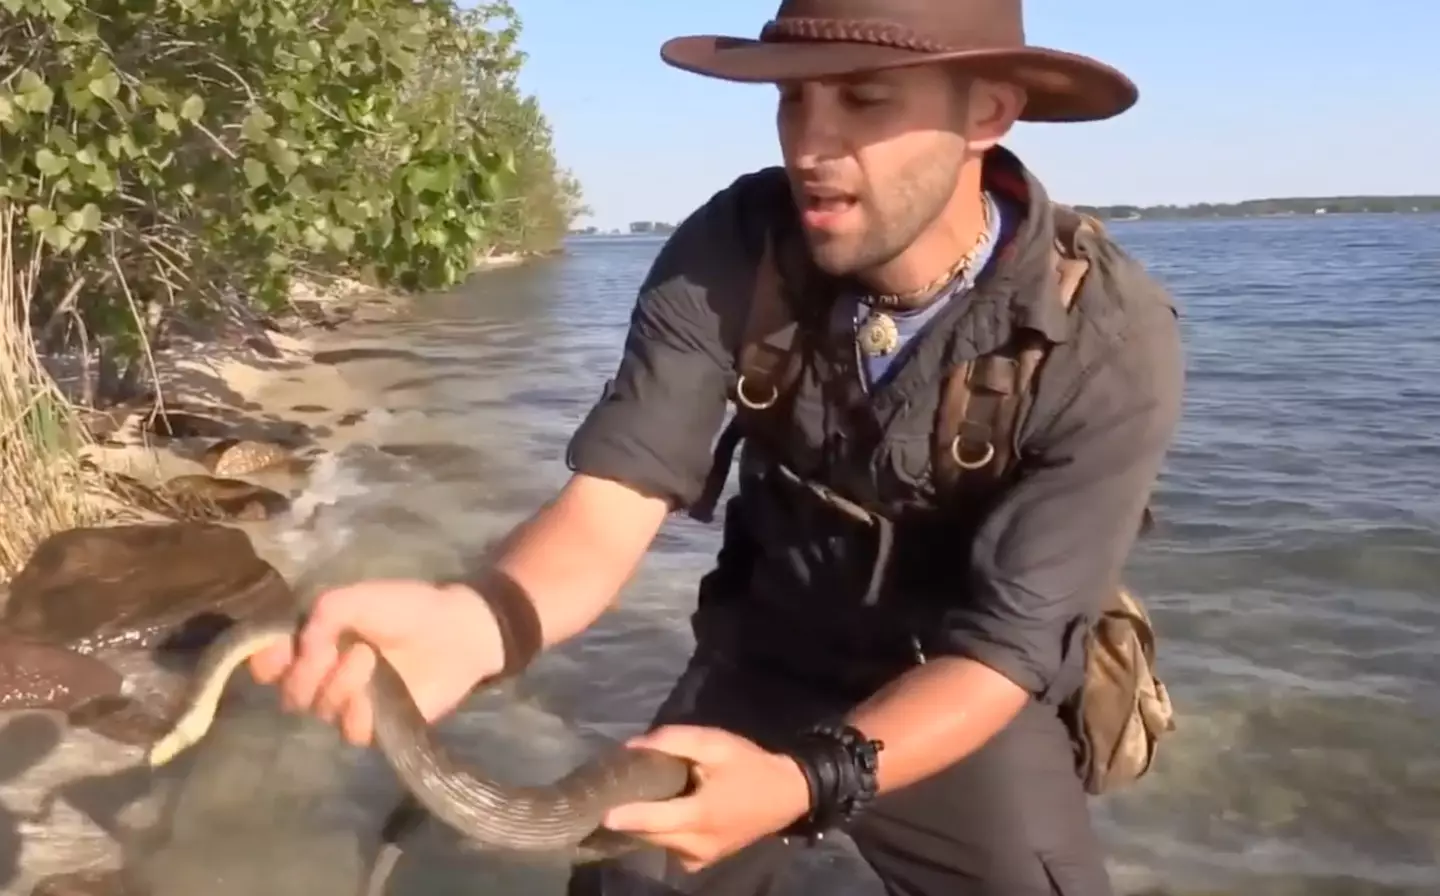 Coyote Peterson got up close and personal with a Lake Erie watersnake while visiting Ohio's 'Snake Island.'